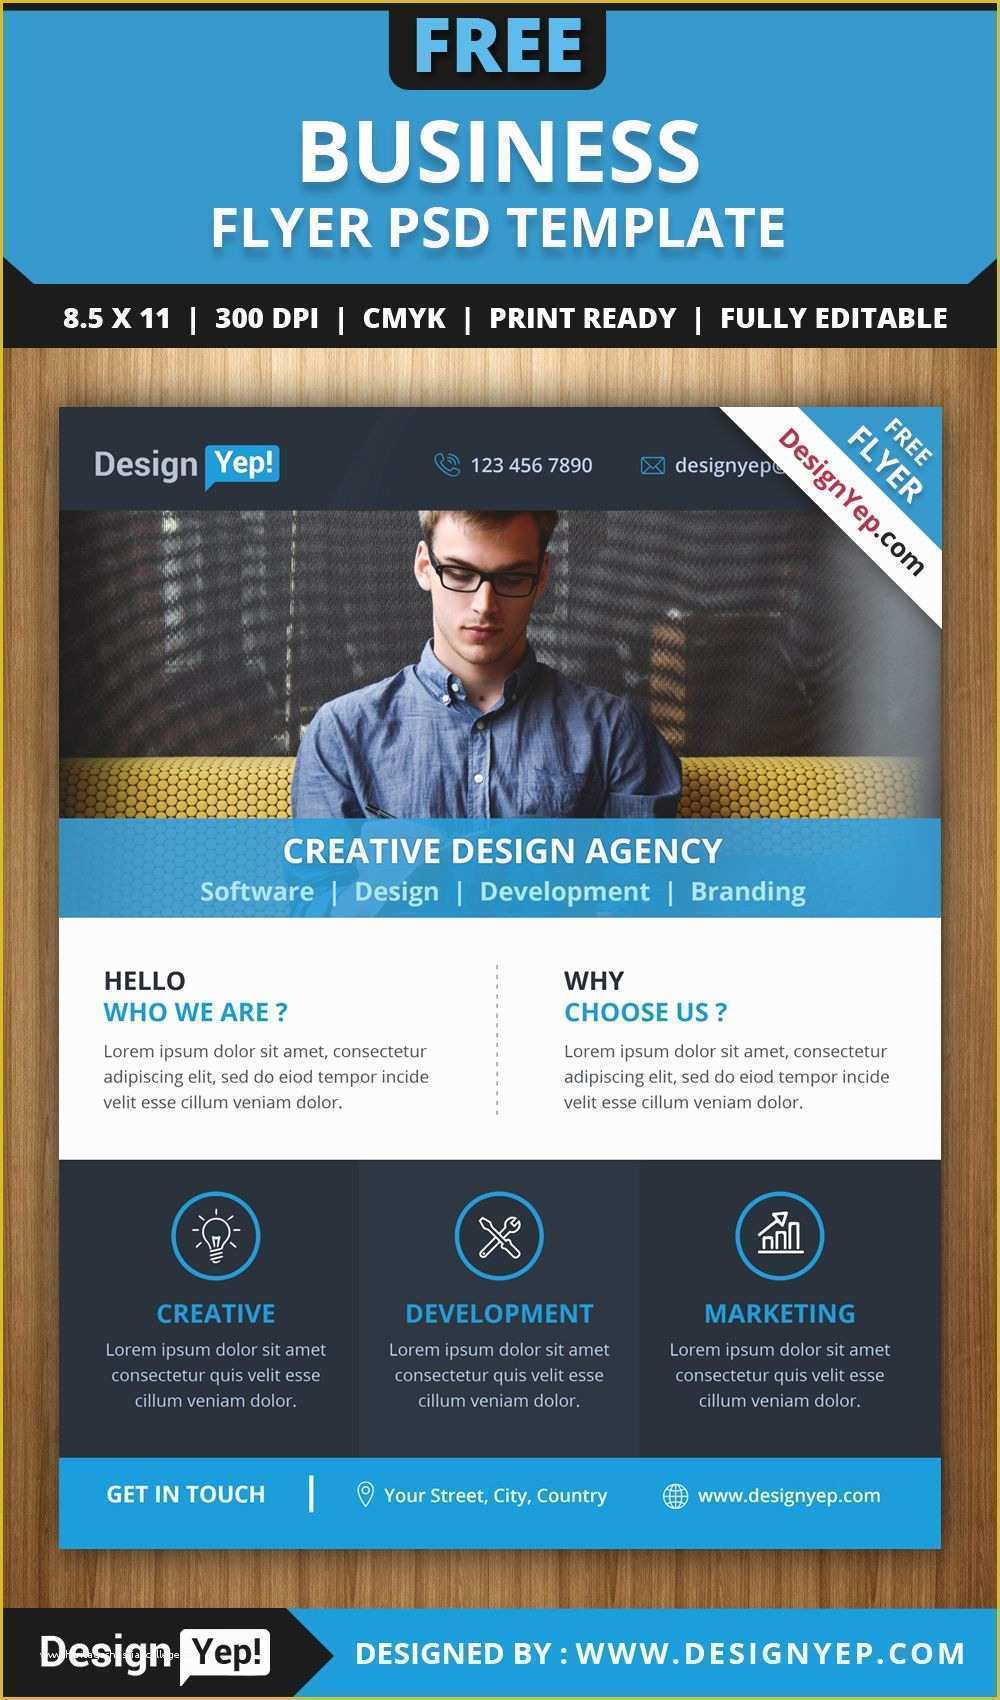 Ad Templates Free Of Free Business Flyer Psd Template 6666 Designyep